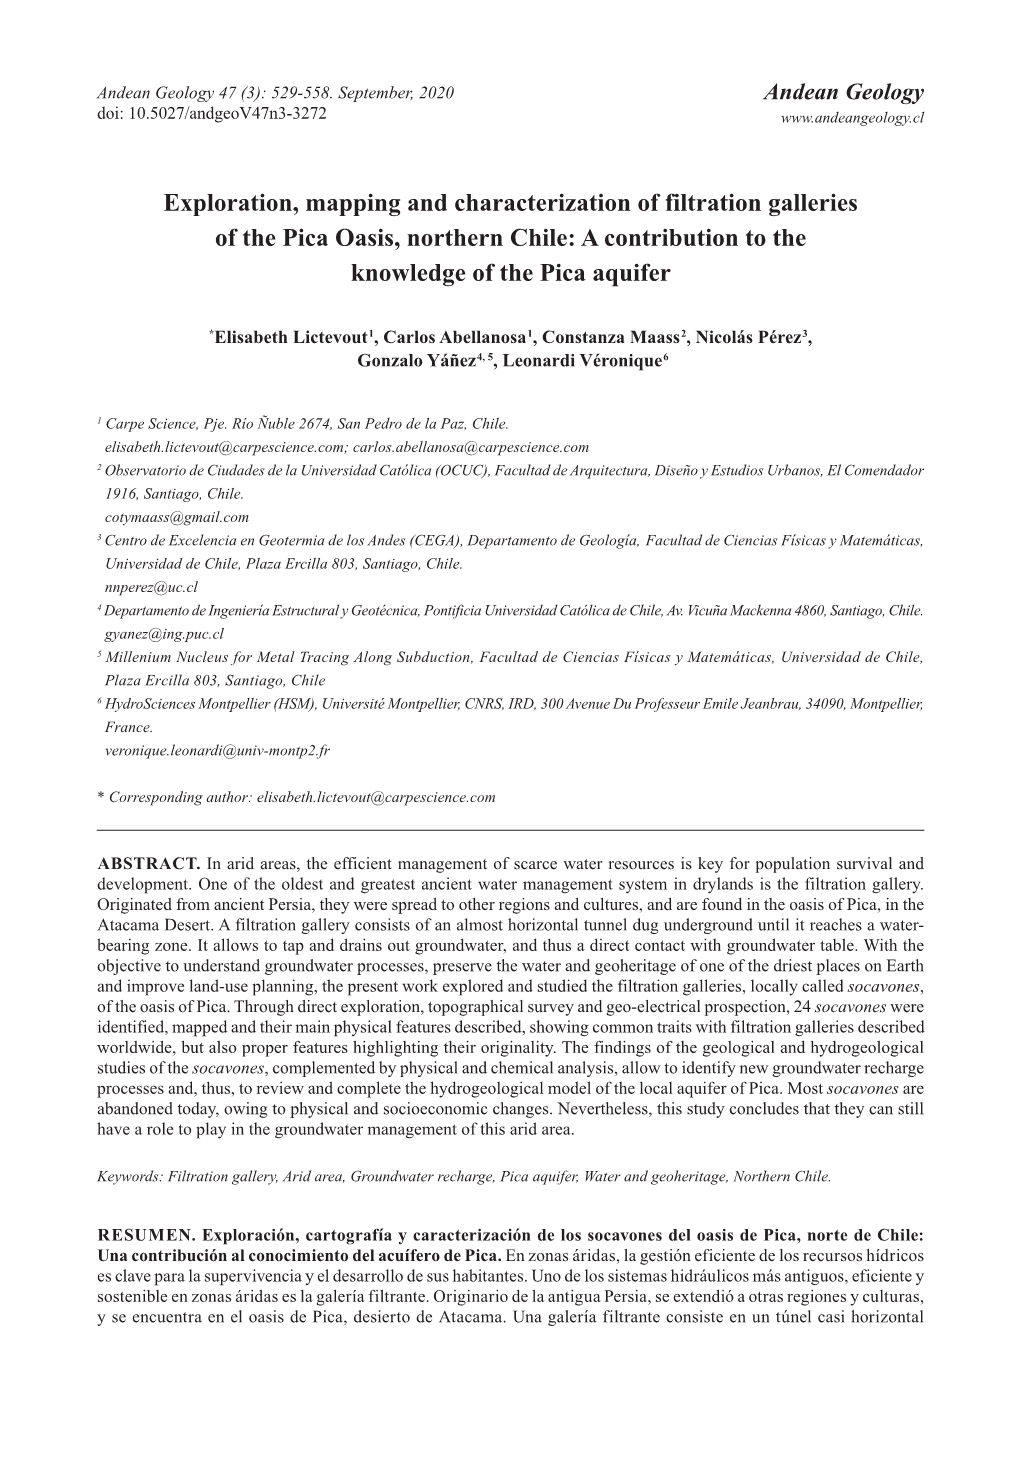 Exploration, Mapping and Characterization of Filtration Galleries of the Pica Oasis, Northern Chile: a Contribution to the Knowledge of the Pica Aquifer